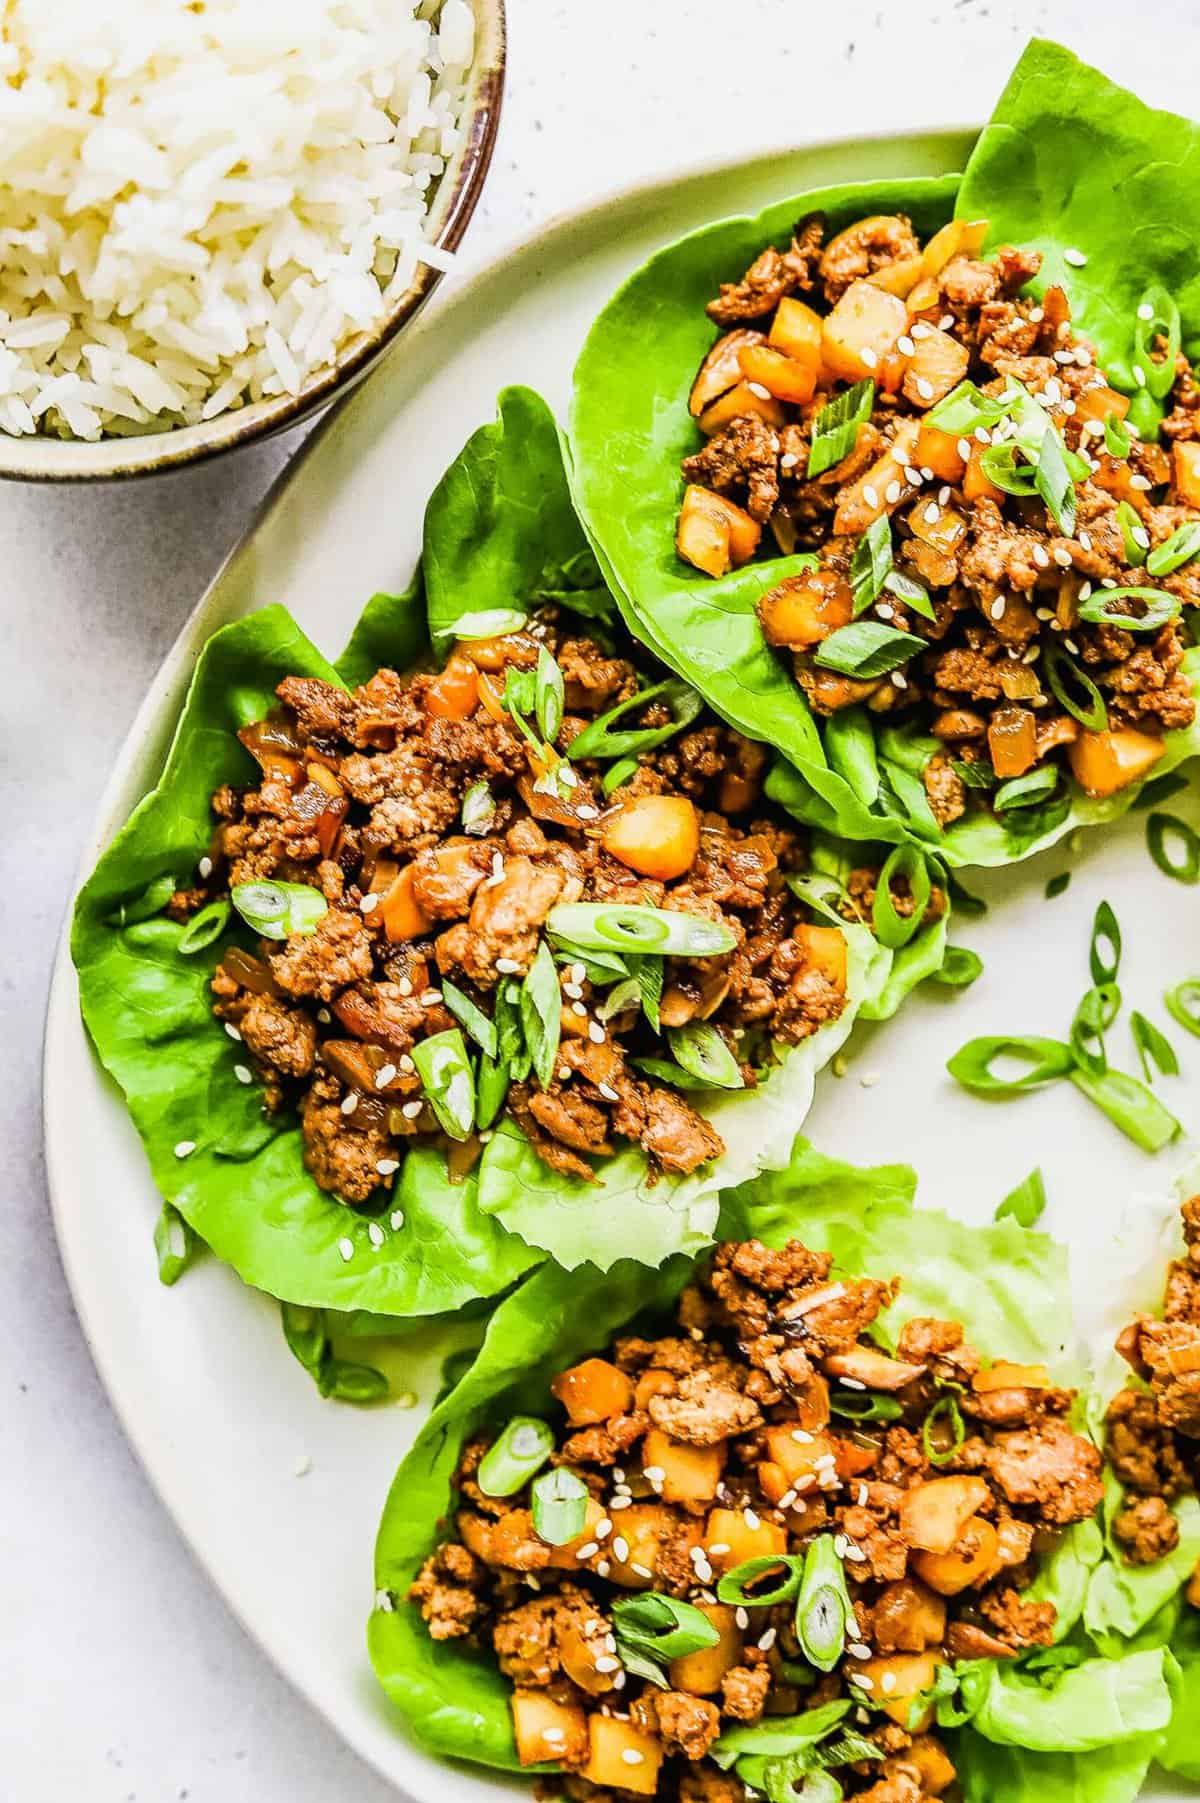 Chicken lettuce wraps garnished with green onions.